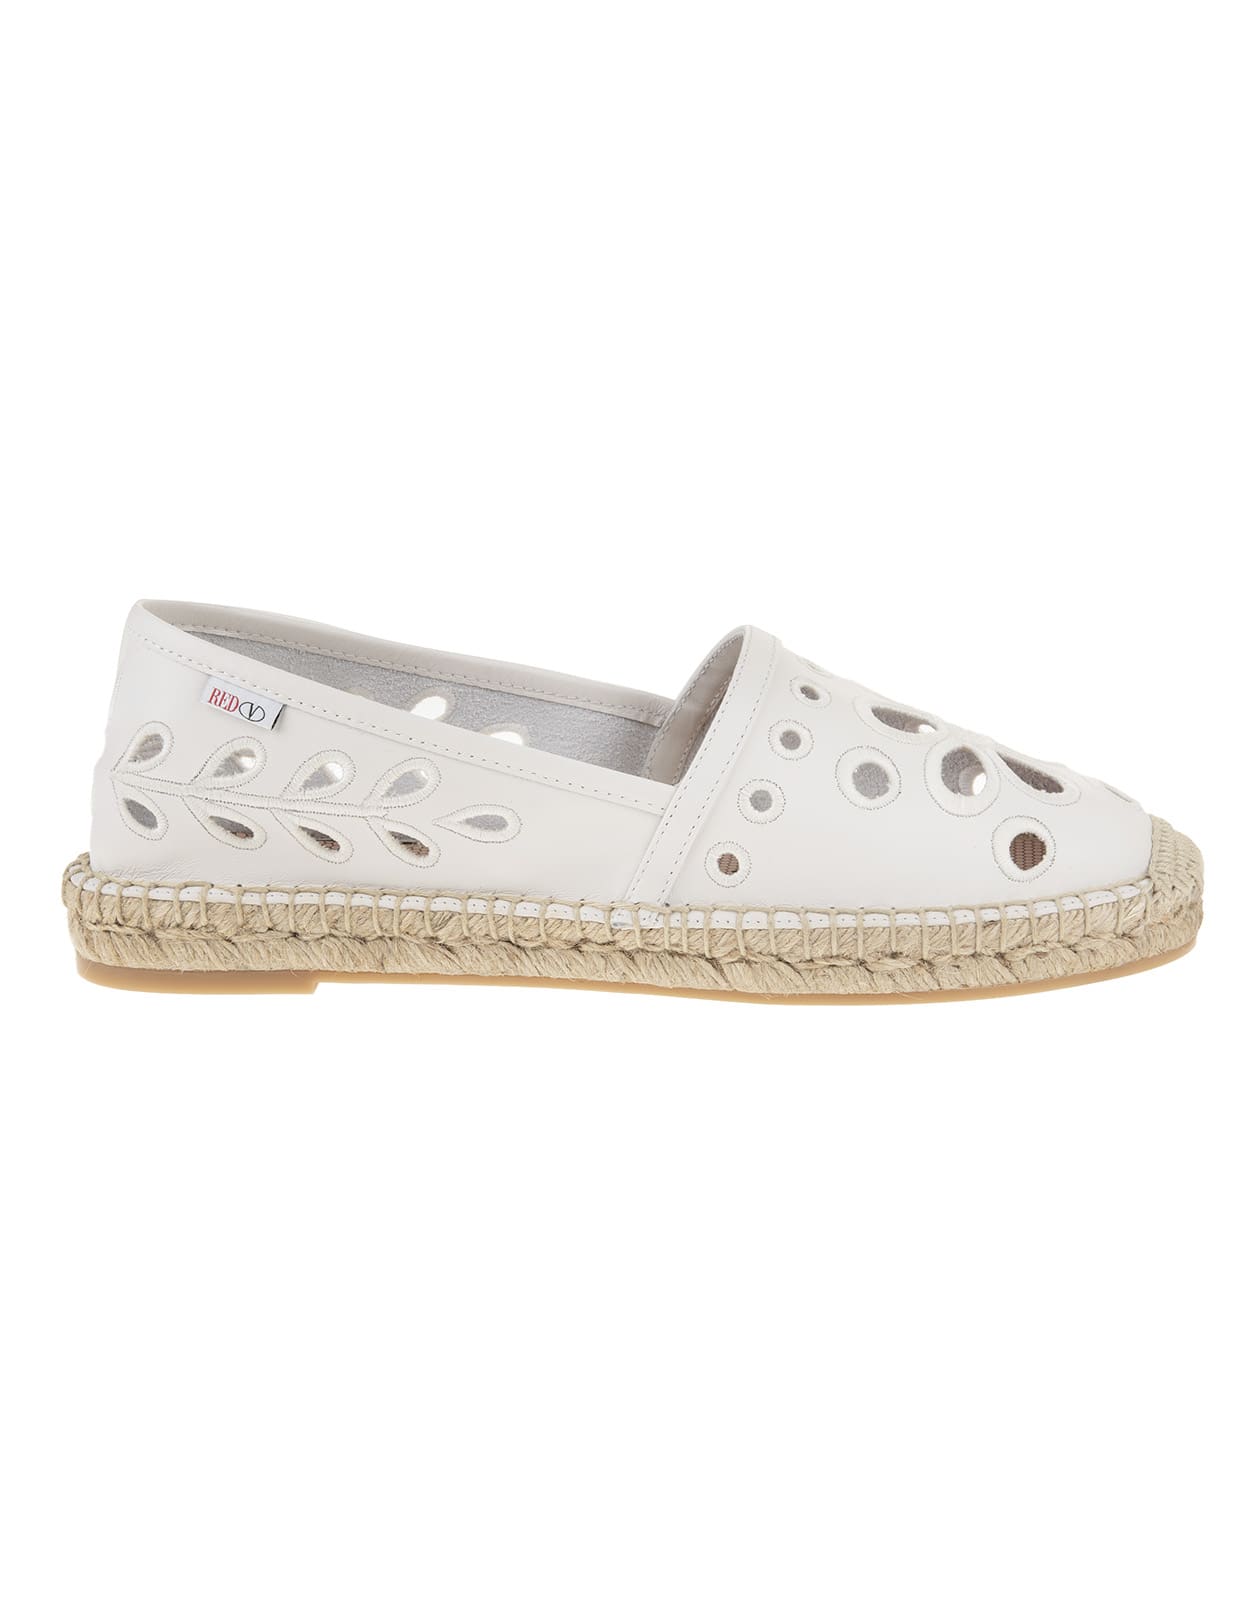 Buy RED Valentino White Leather Espadrilles With Cut-out Detail online, shop RED Valentino shoes with free shipping